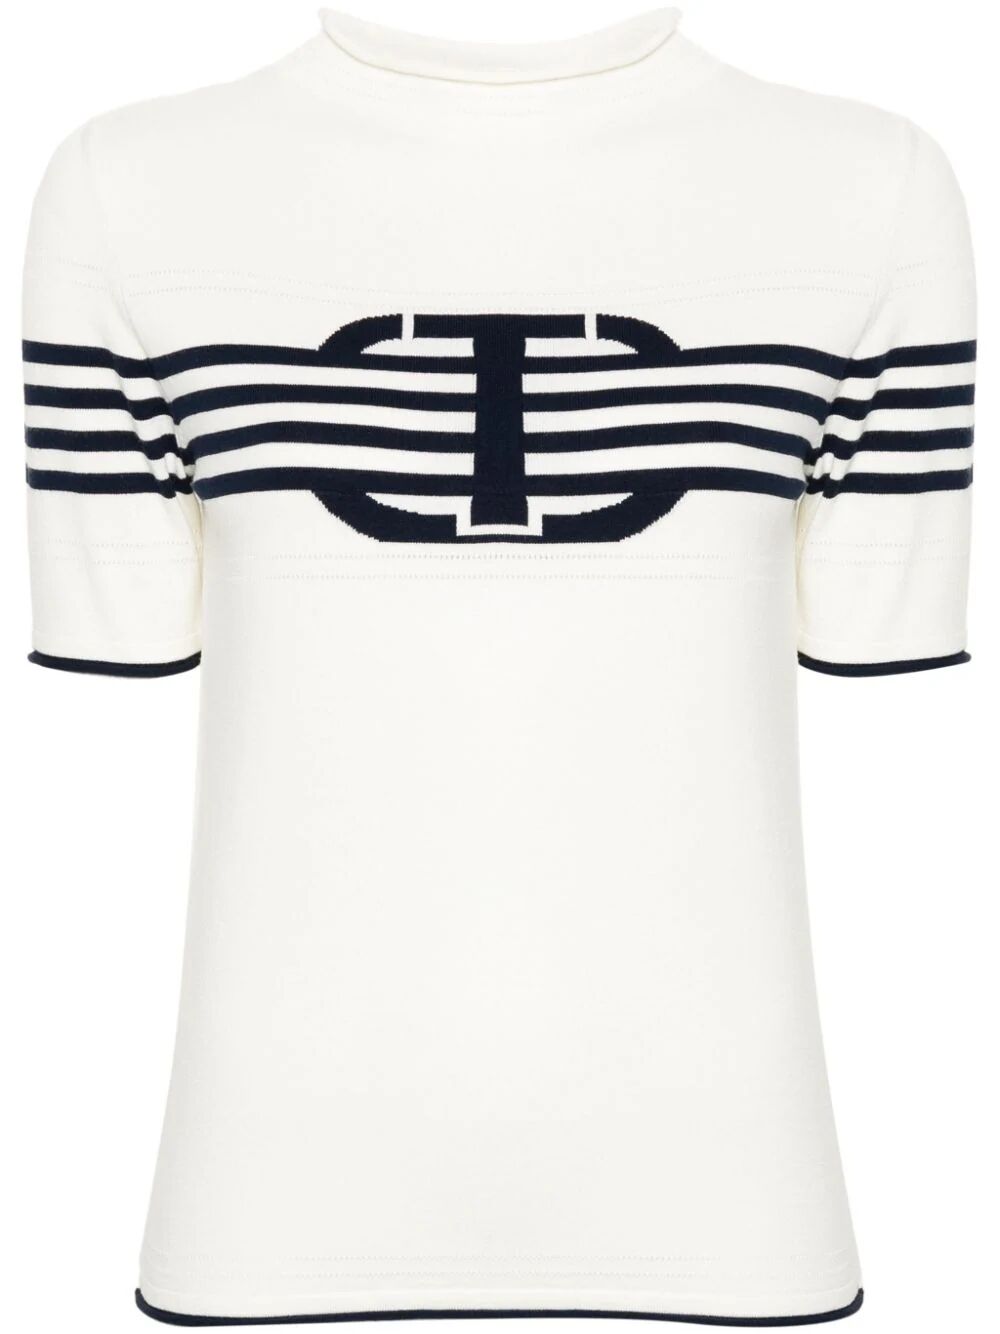 Short Sleeves High Neck Striped Sweater With Logo